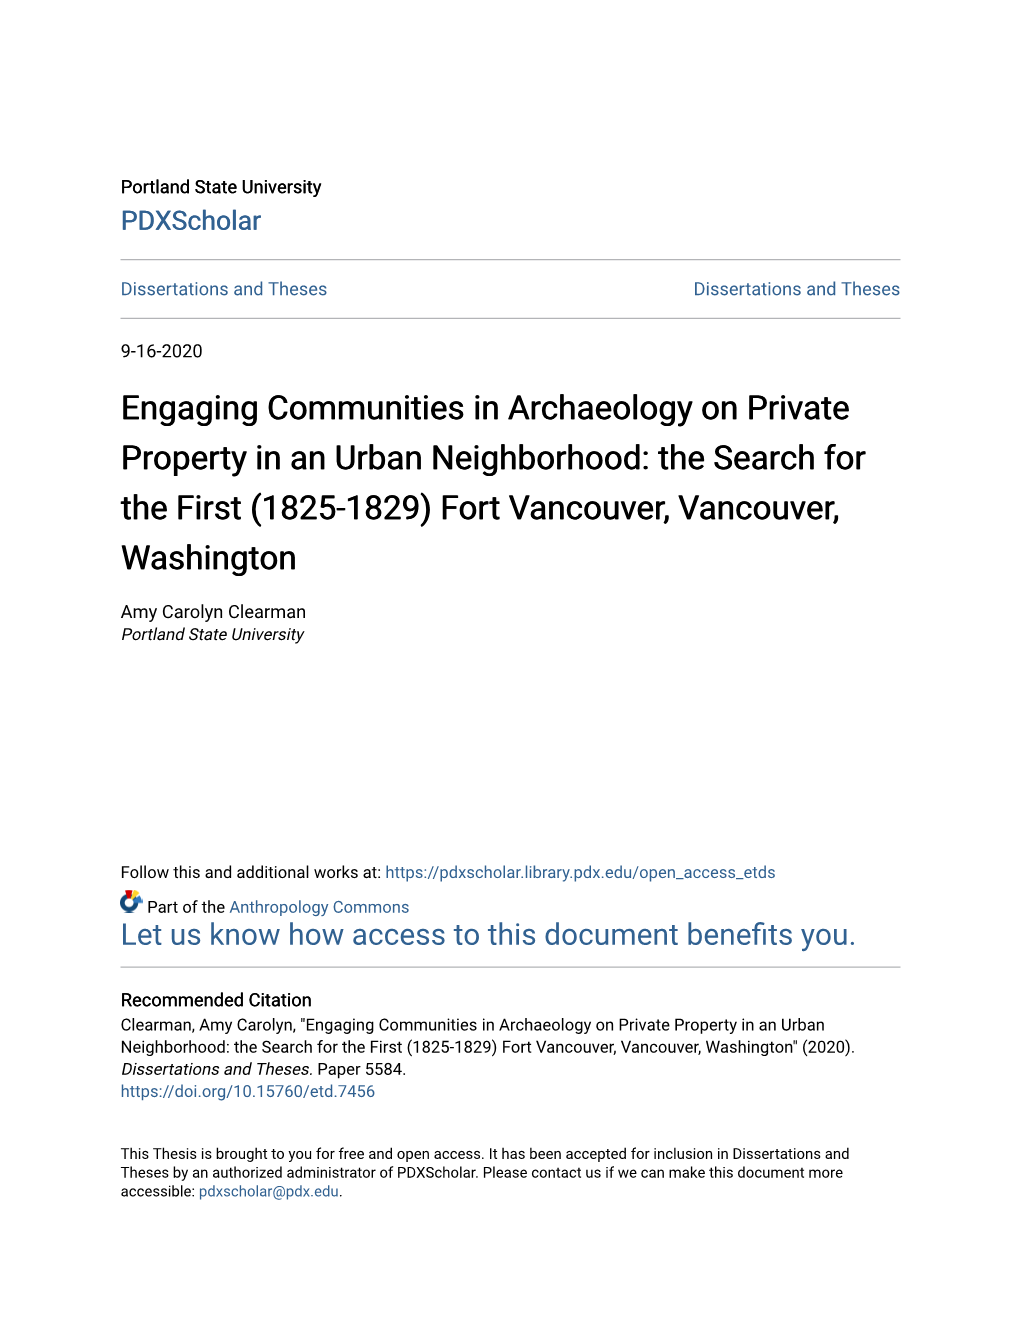 Engaging Communities in Archaeology on Private Property in an Urban Neighborhood: the Search for the First (1825-1829) Fort Vancouver, Vancouver, Washington